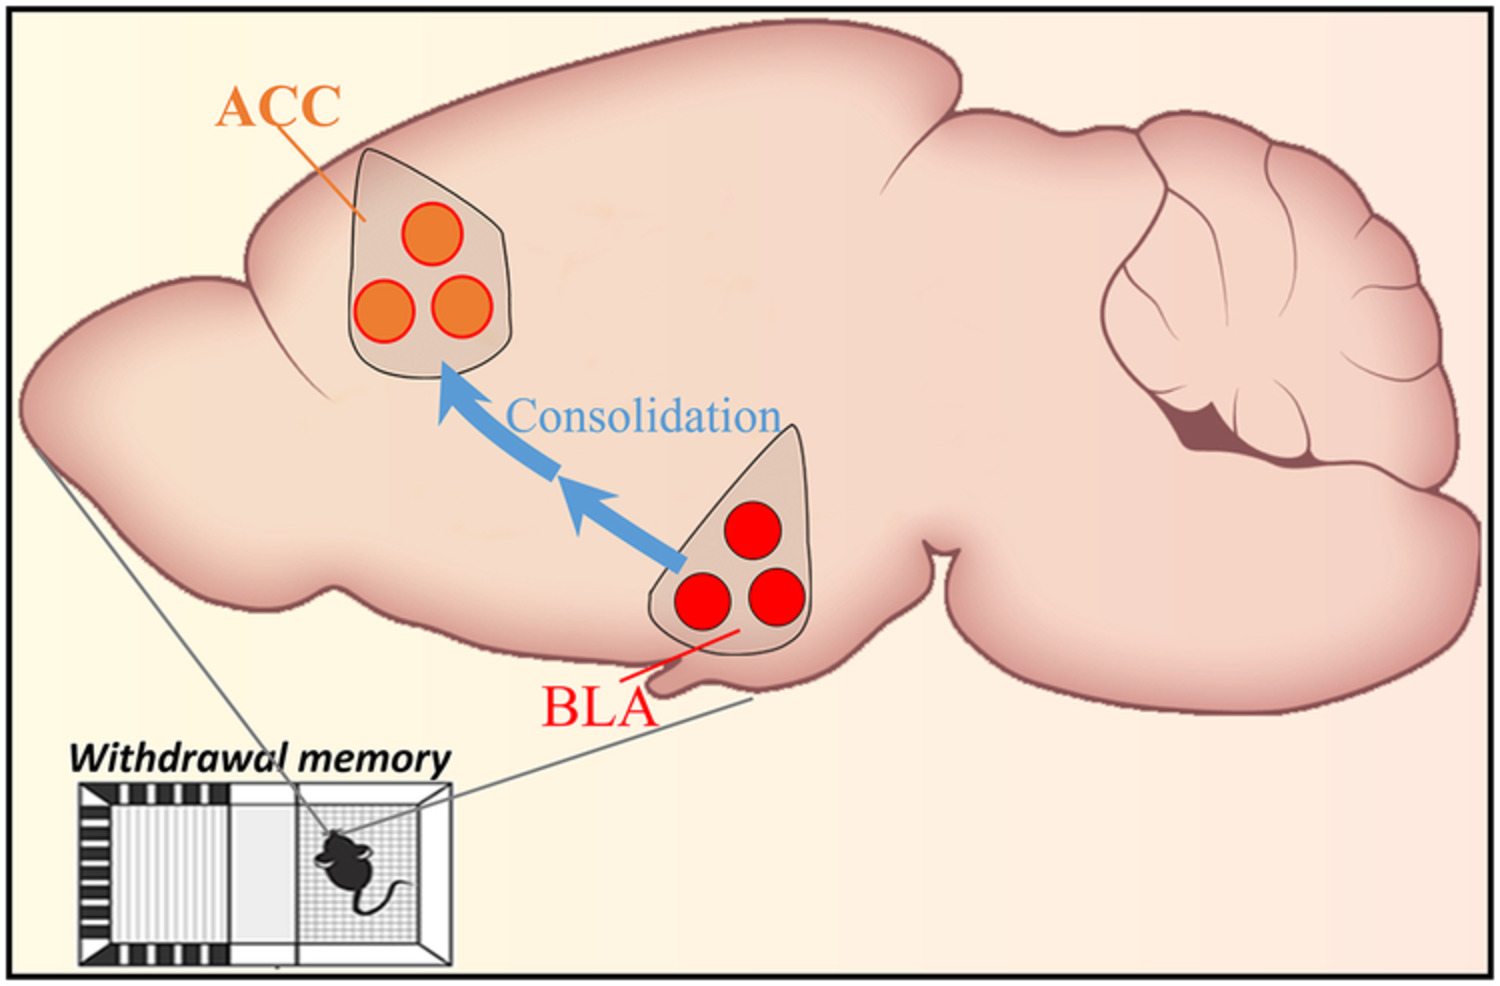 Projection from the basolateral amygdala to the anterior cingulate cortex facilitates the consolidation of long‐term withdrawal memory